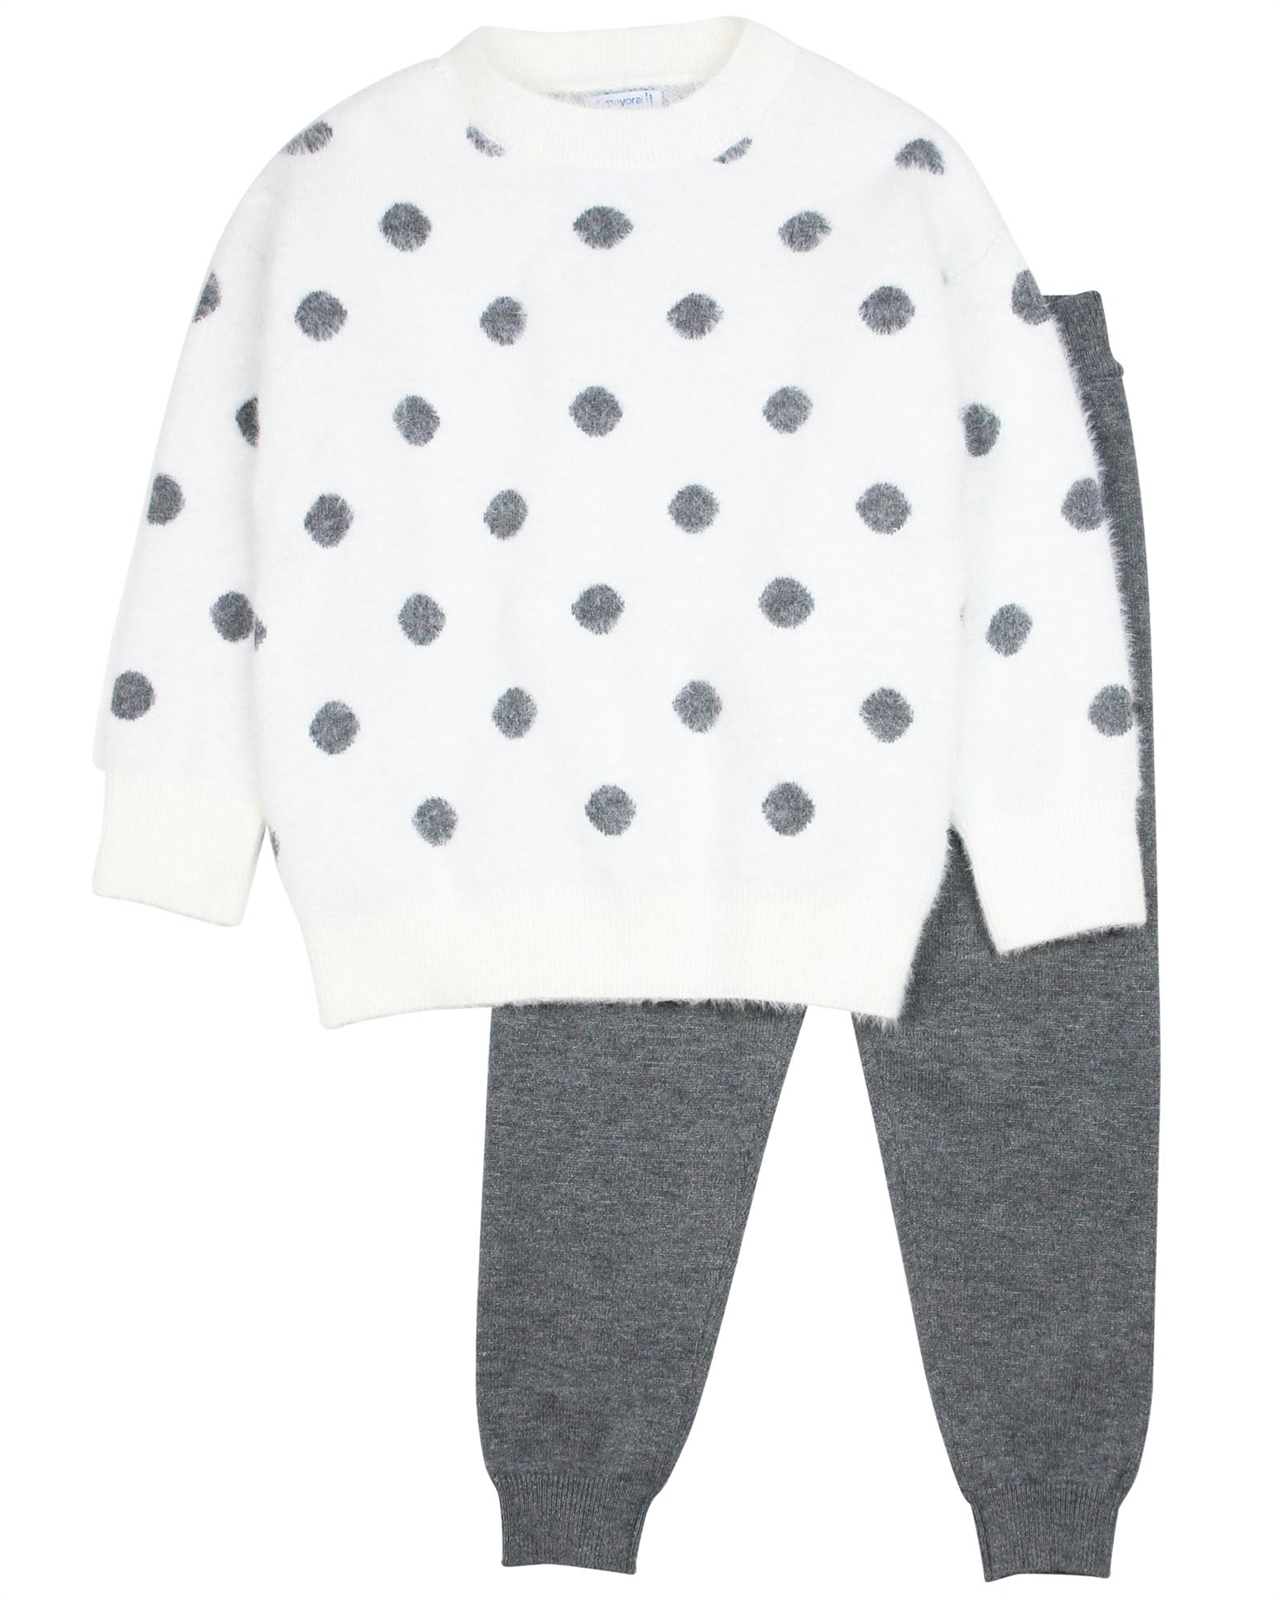 MAYORAL Girl's Shag Knit Sweater and Pants Set, Sizes 4-9